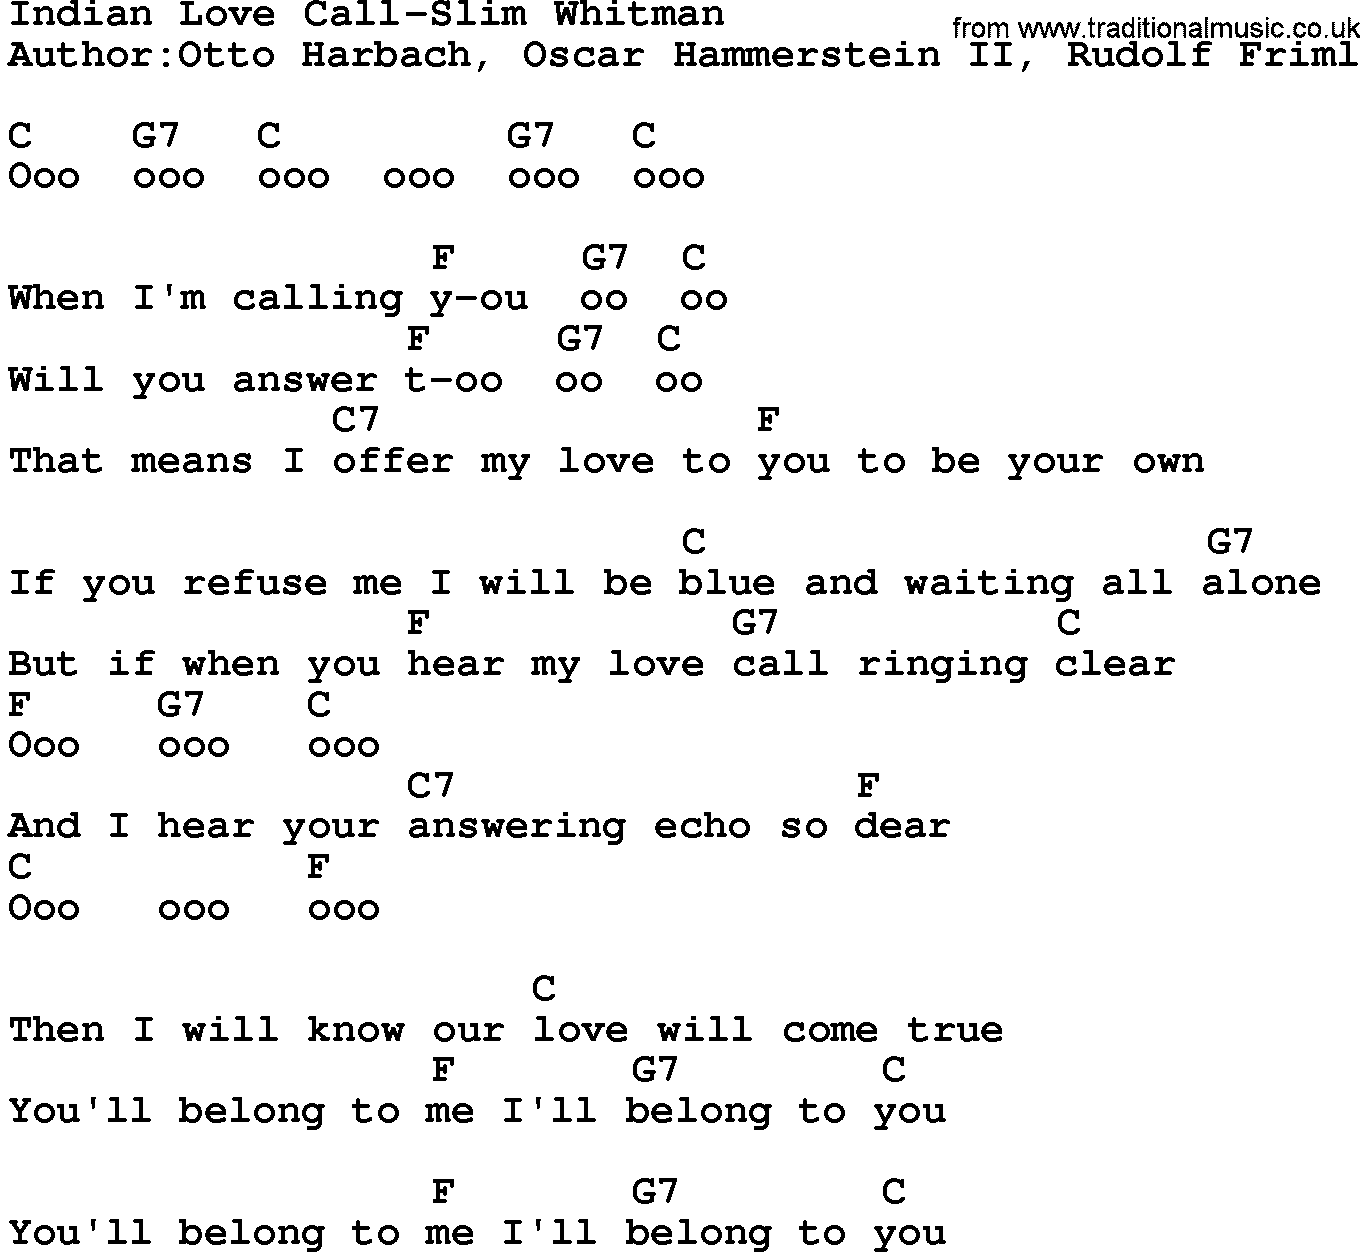 Country music song: Indian Love Call-Slim Whitman lyrics and chords